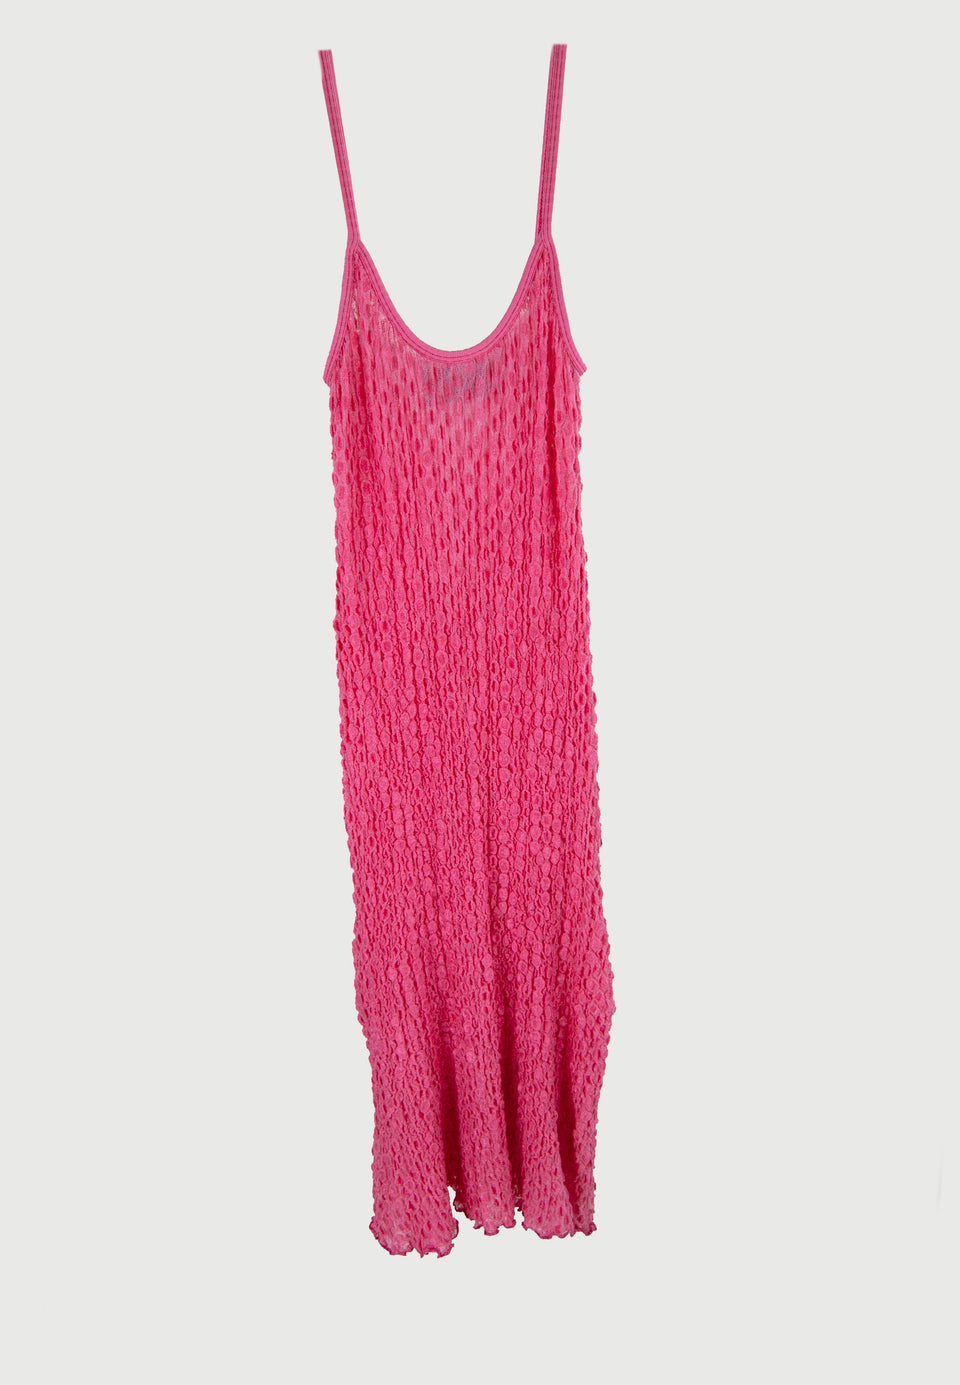 Pink Mexican Bobble Dress